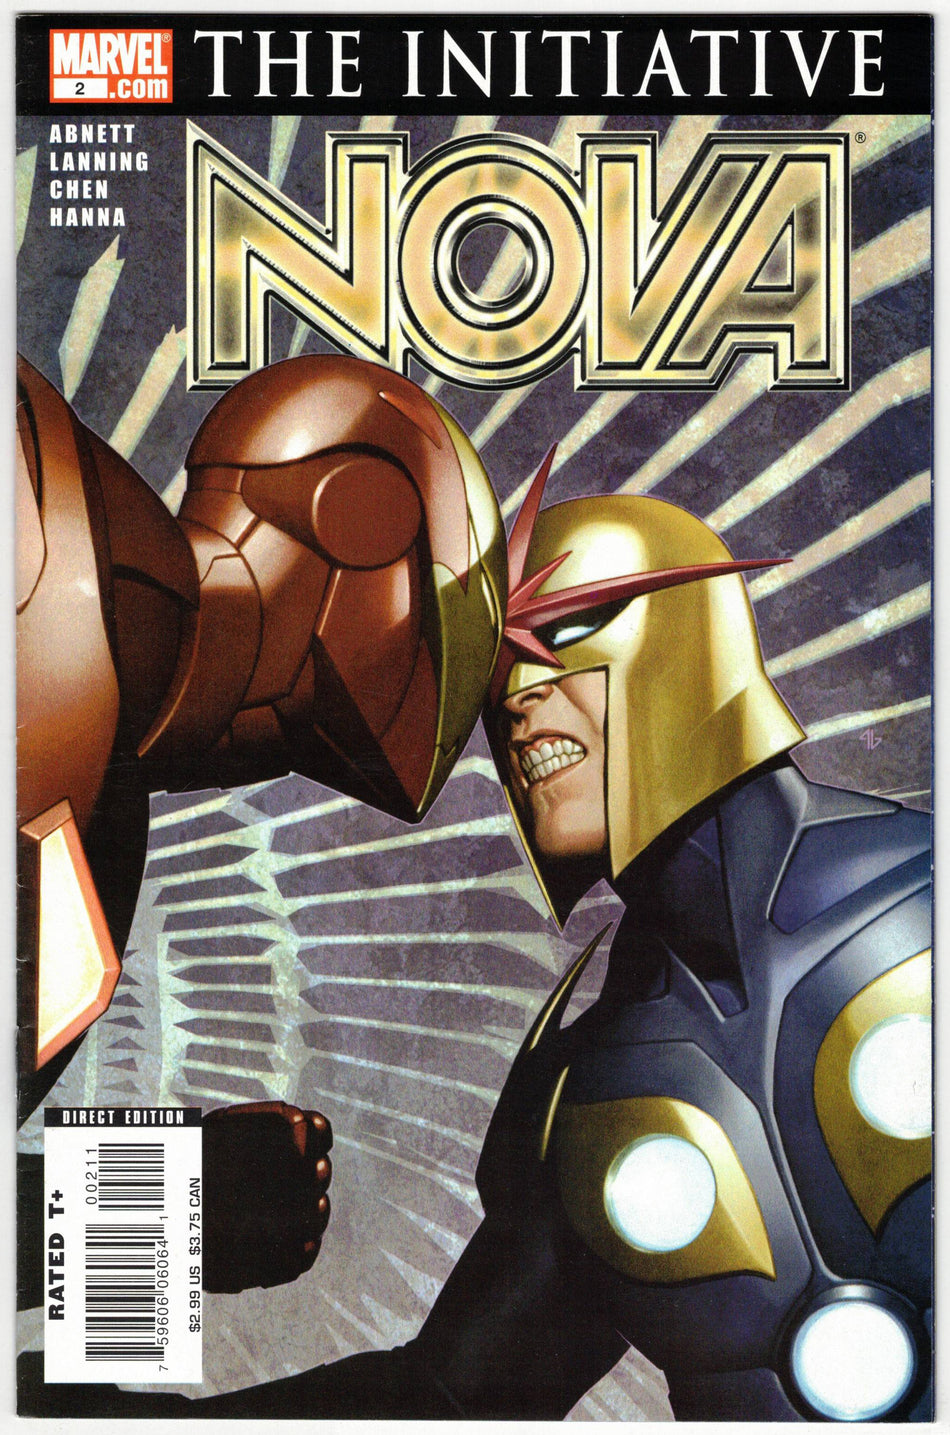 Photo of Nova, Vol. 4 (2007) Issue 2 - Near Mint/Mint Comic sold by Stronghold Collectibles